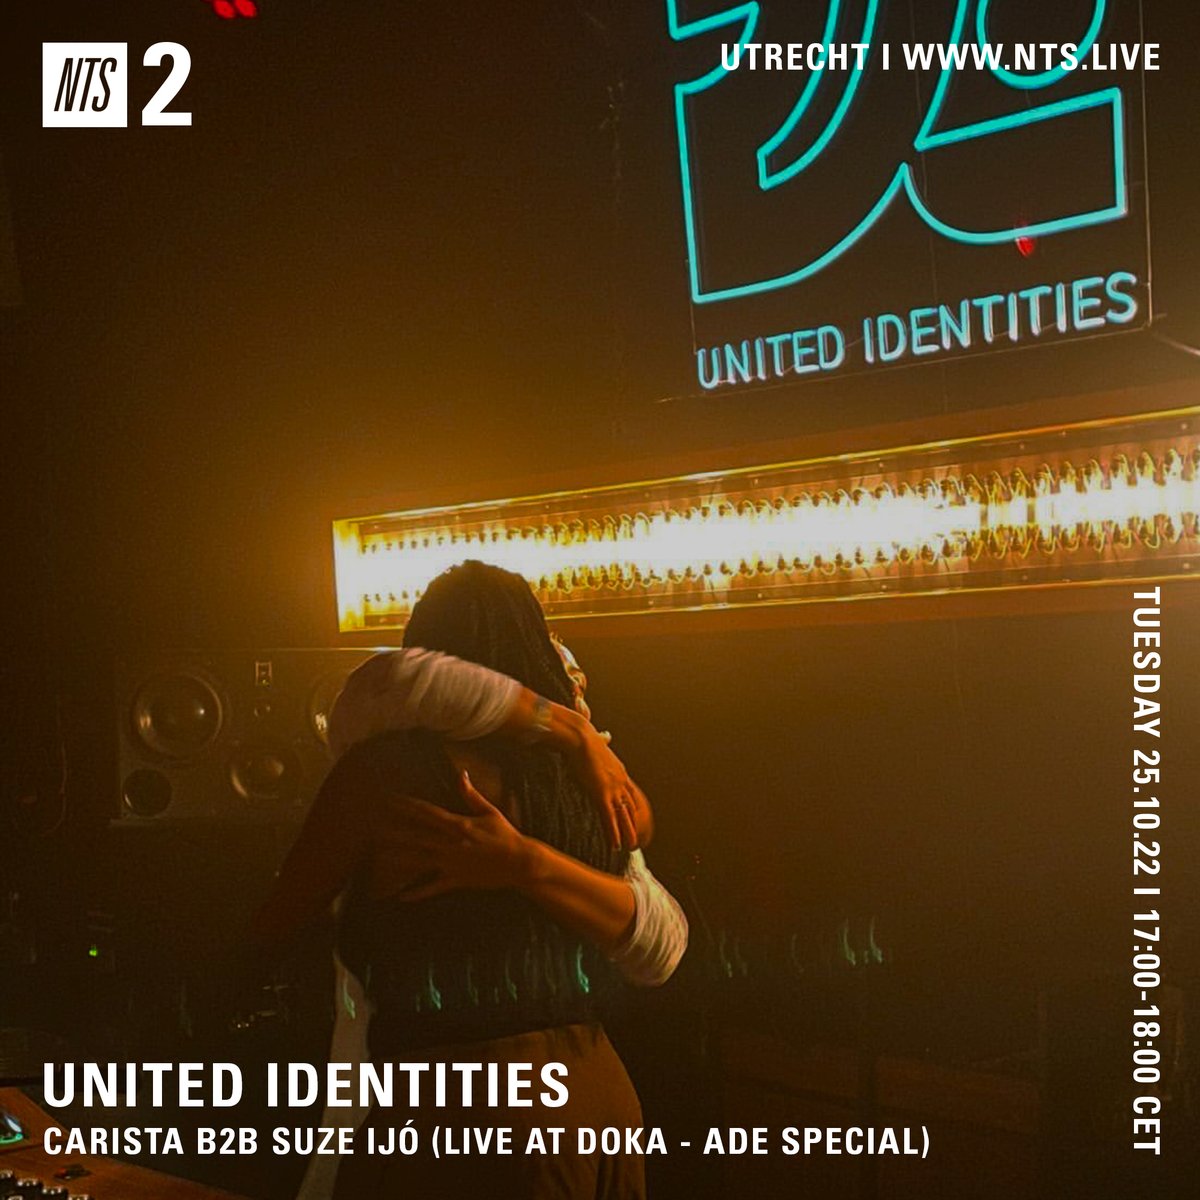 .@weareuimusic sharing an hour long recording from @iamcarista + Suze Ijo's ADE 2022 set... Stay tuned via nts.live/2